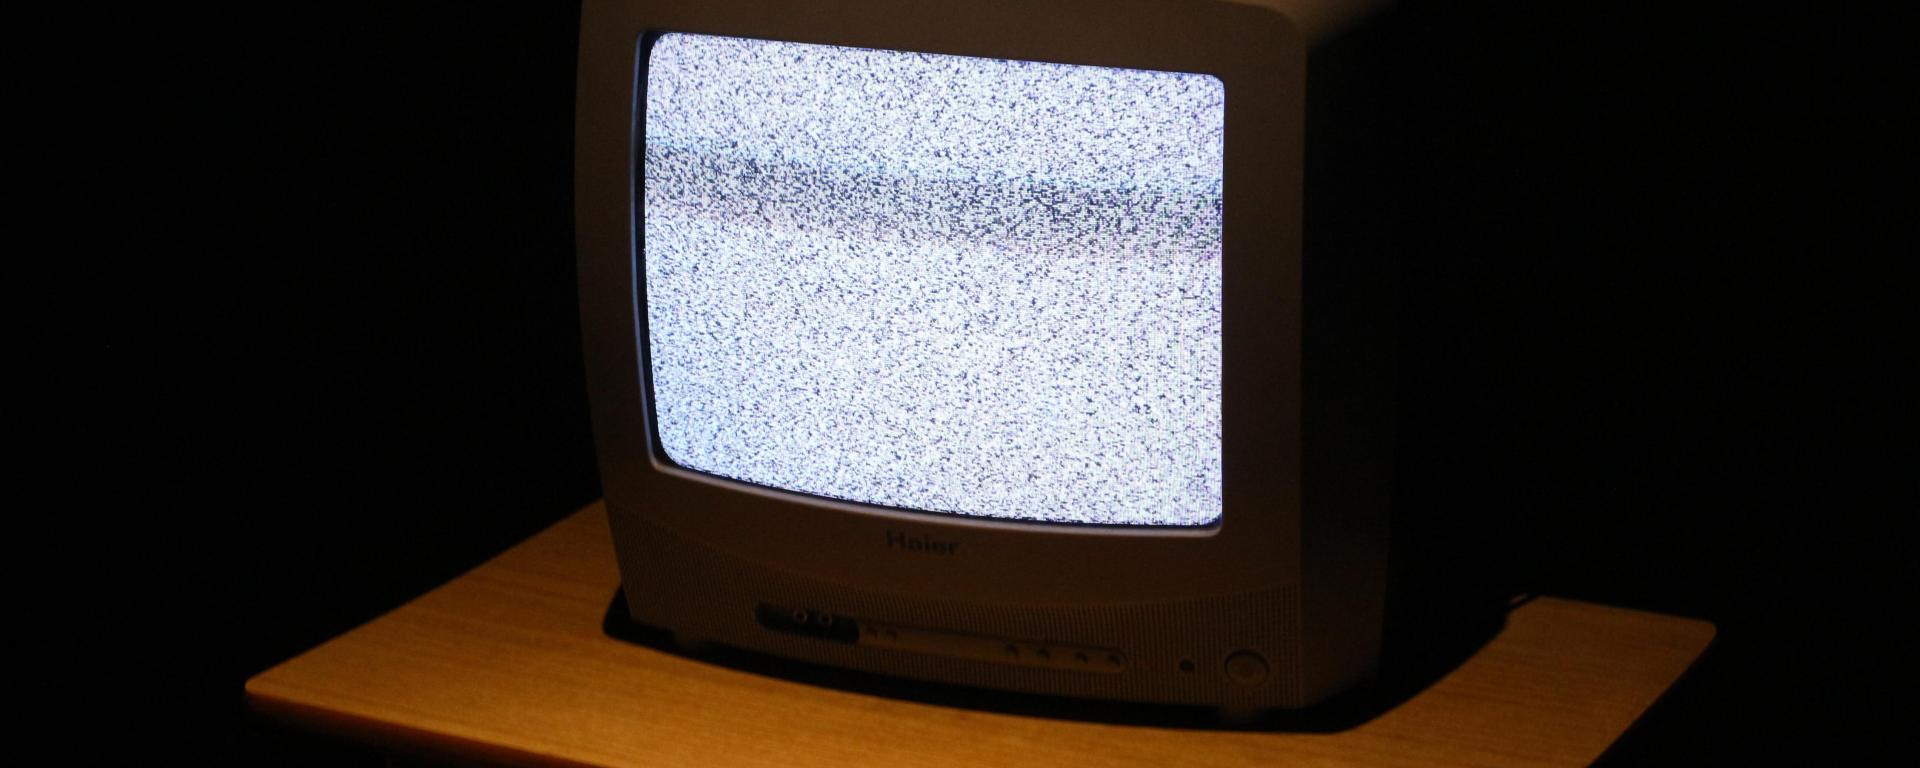 Old television showing scramble